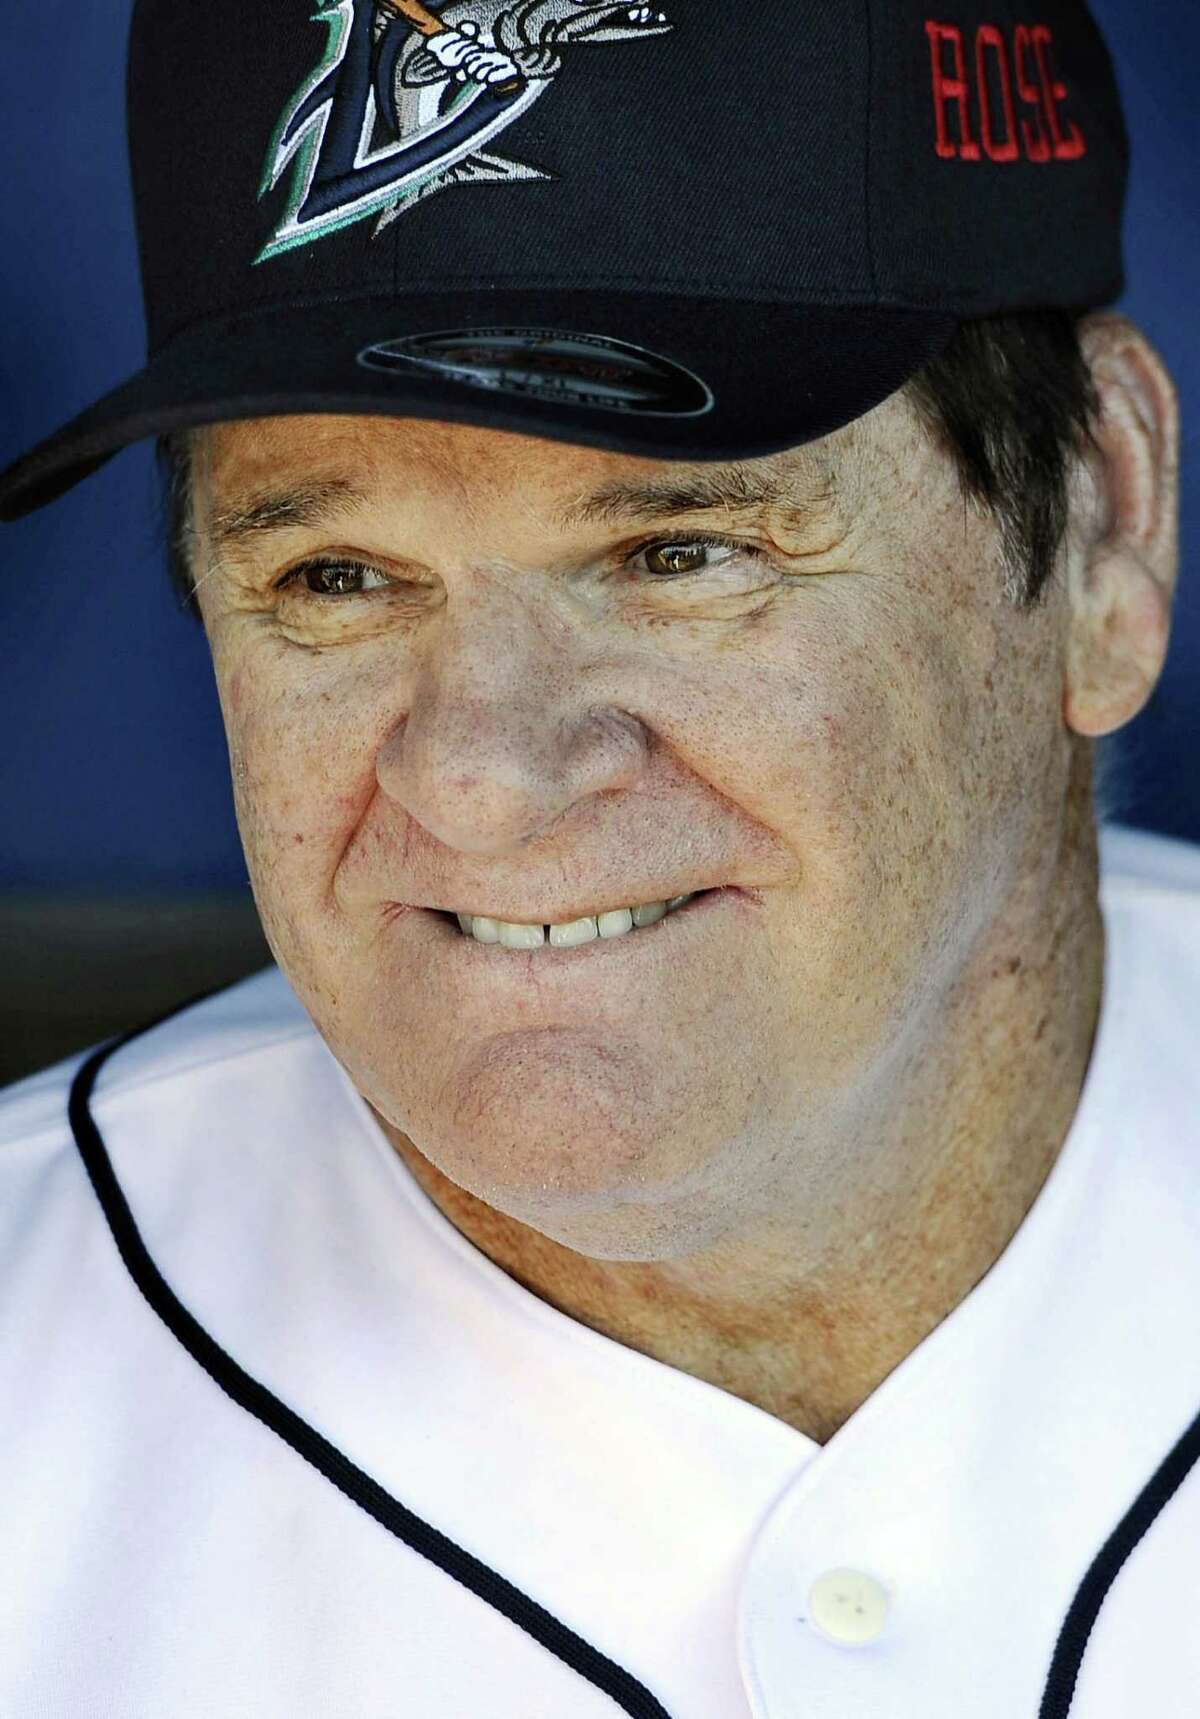 In this June 16, 2014 file photo, Pete Rose smiles while sitting in the dugout at The Ballpark at Harbor Yard in Bridgeport.